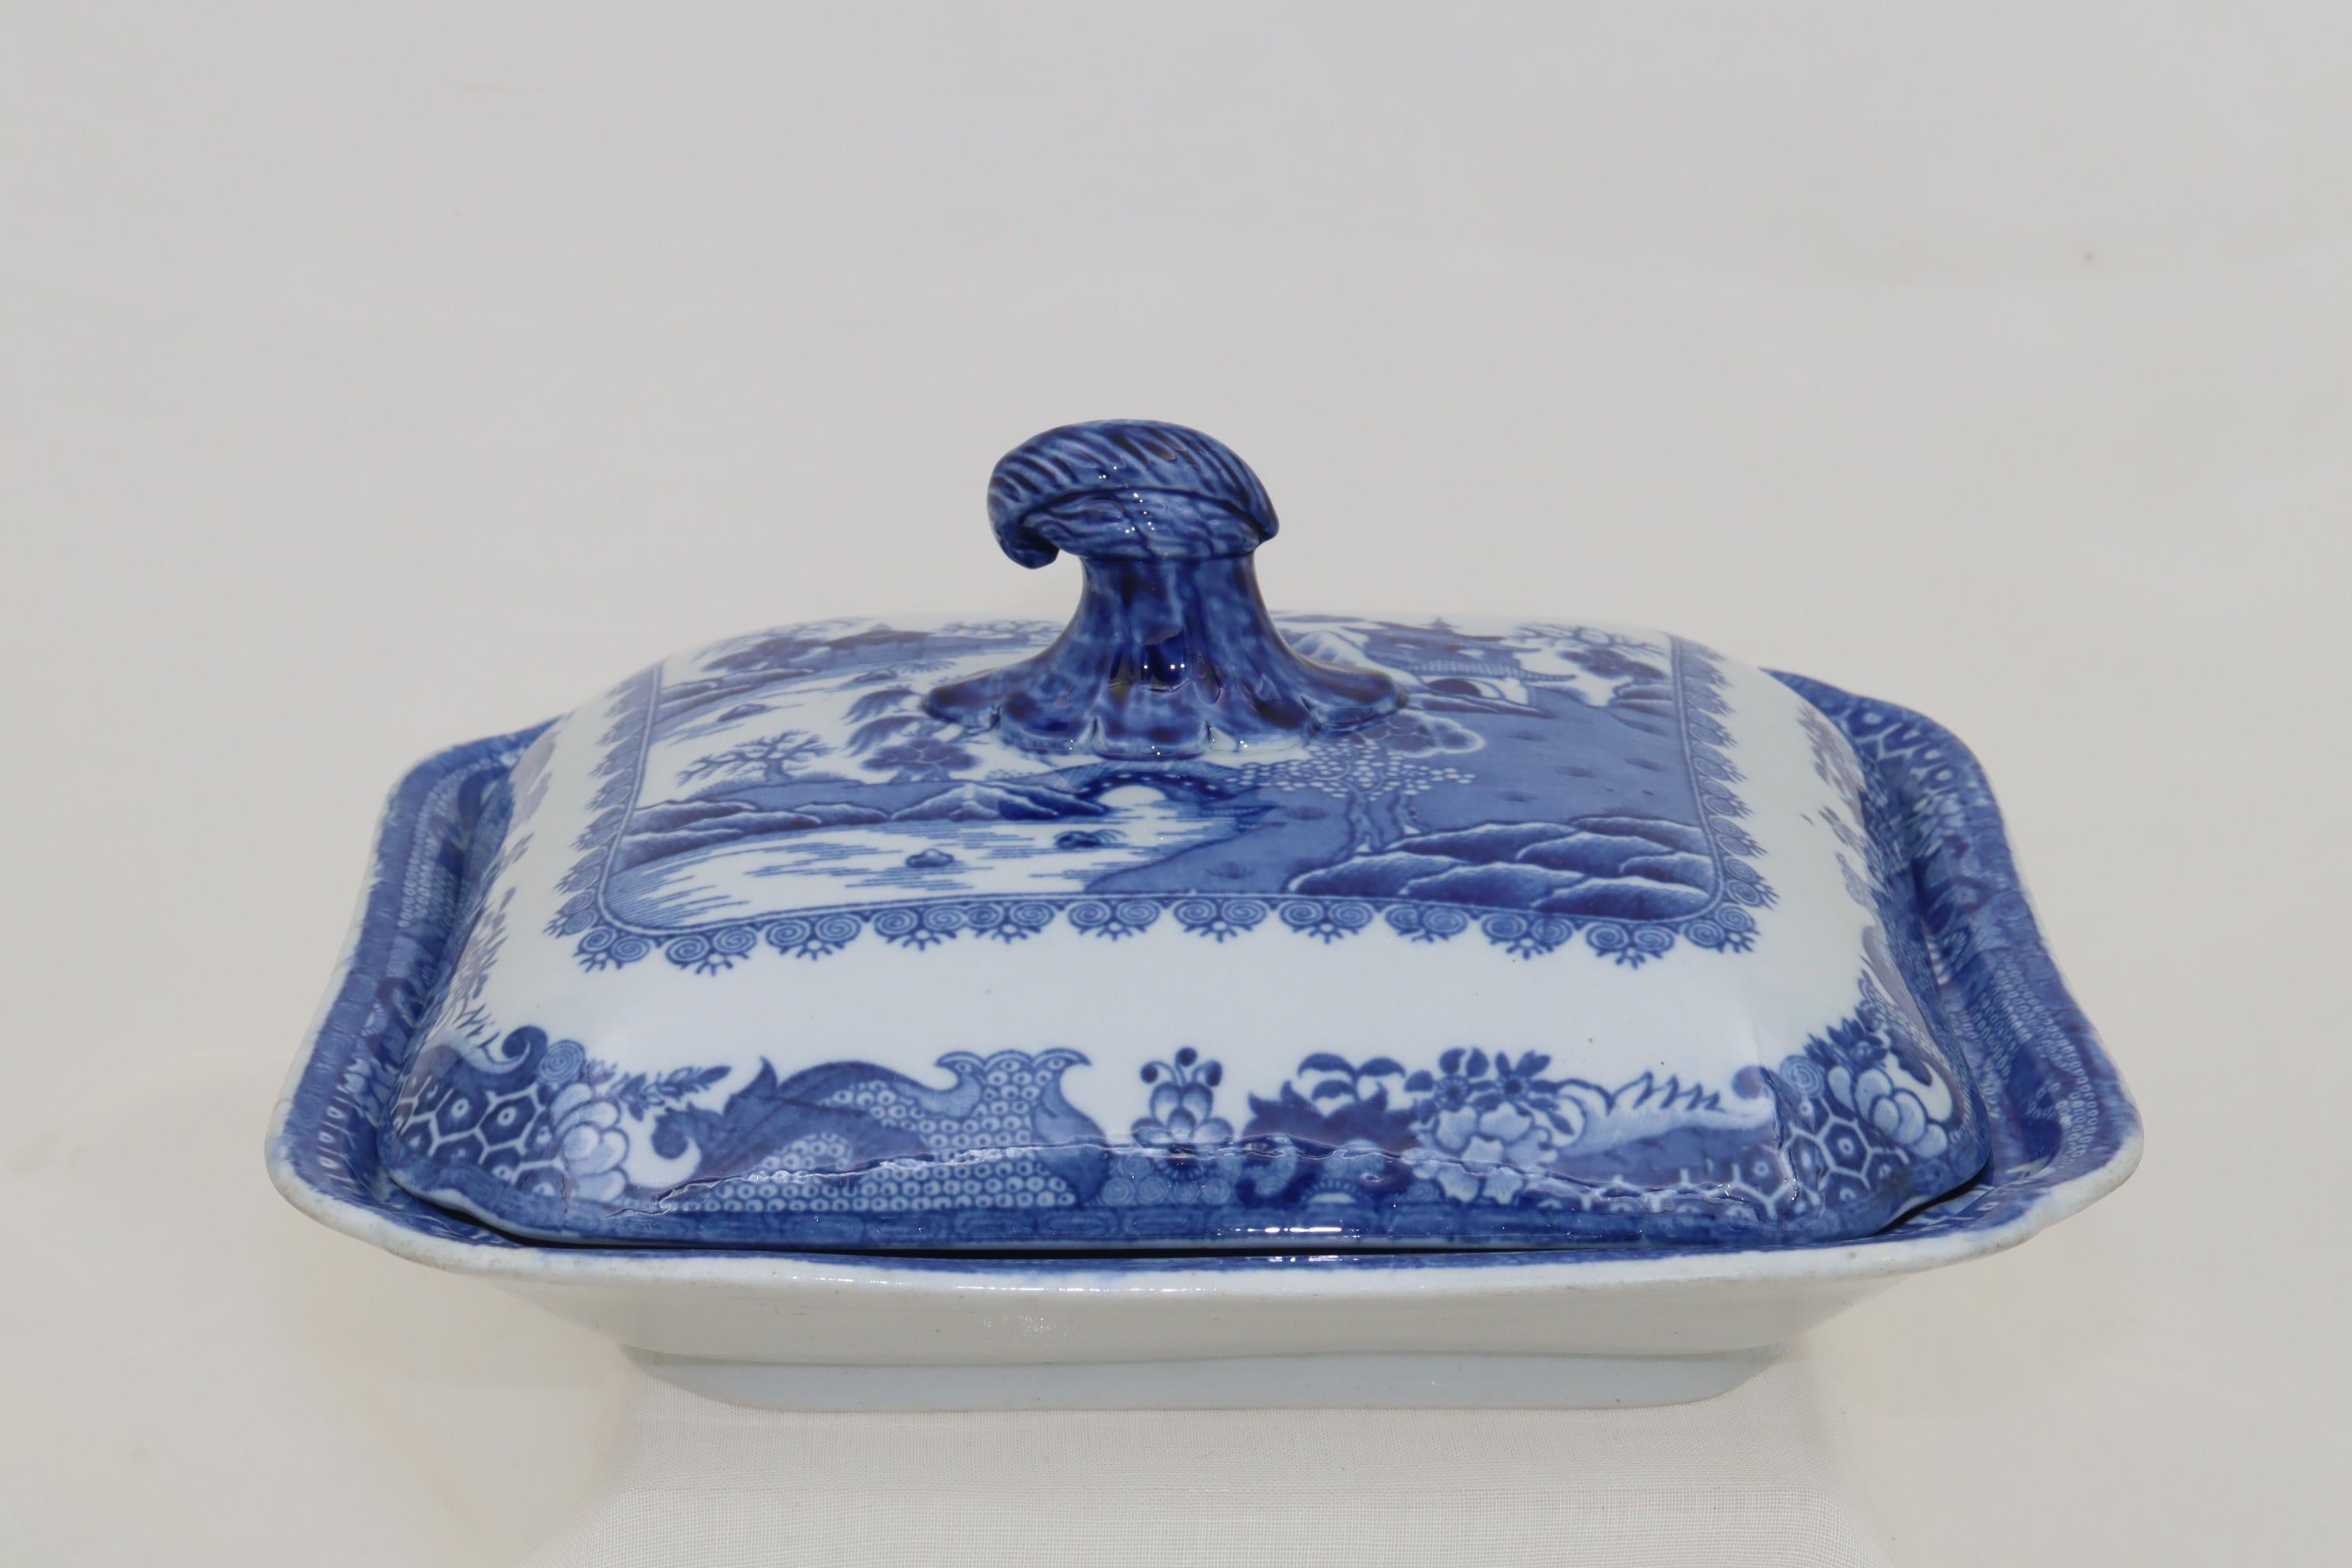 This lidded vegetable tureen by is by Turner & Co of Lane End in Staffordshire, who were in business from around 1762 until 1806. It is decorated with a printed blue and white willow pattern later known as 